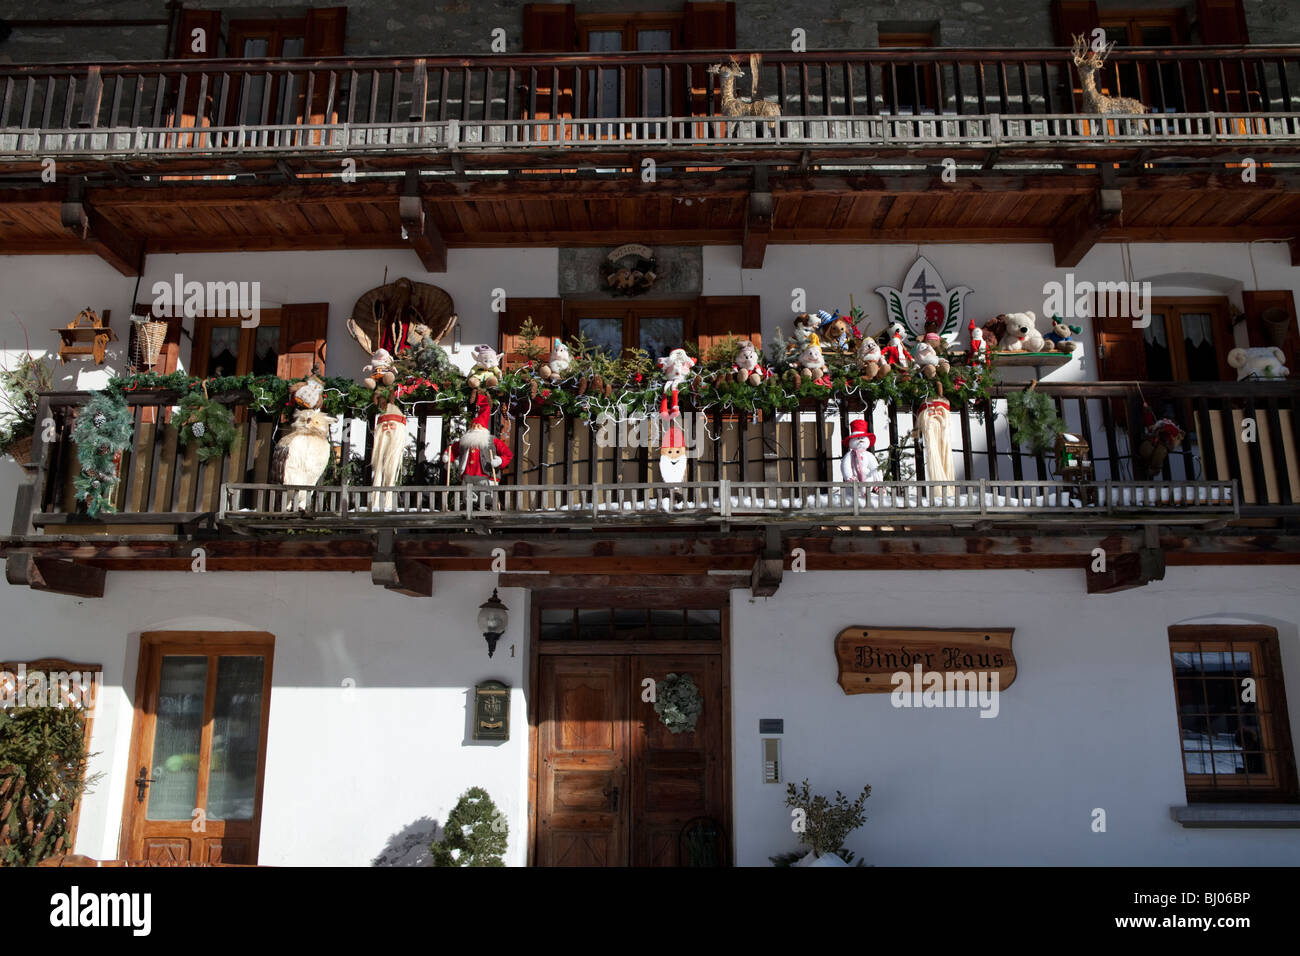 House with puppets and dwarfs on the balcony rail in antique village in the alps. Gressoney la Trinité, Valle d'Aosta, Italy Stock Photo